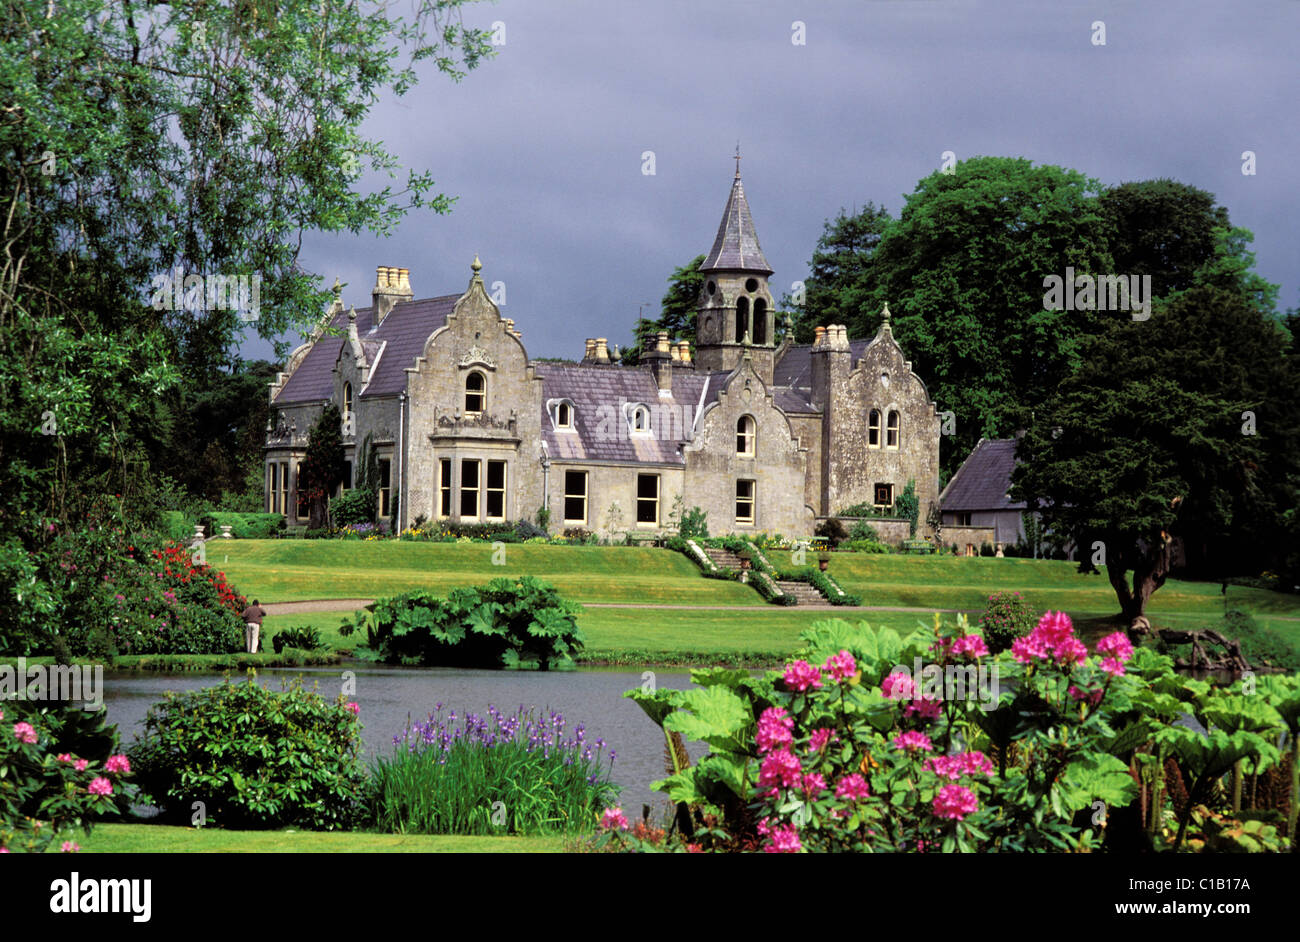 United Kingdom Ulster Fermanagh county charming country manor Tempo Manor Victorian style manor surrounded by a flowered park Stock Photo